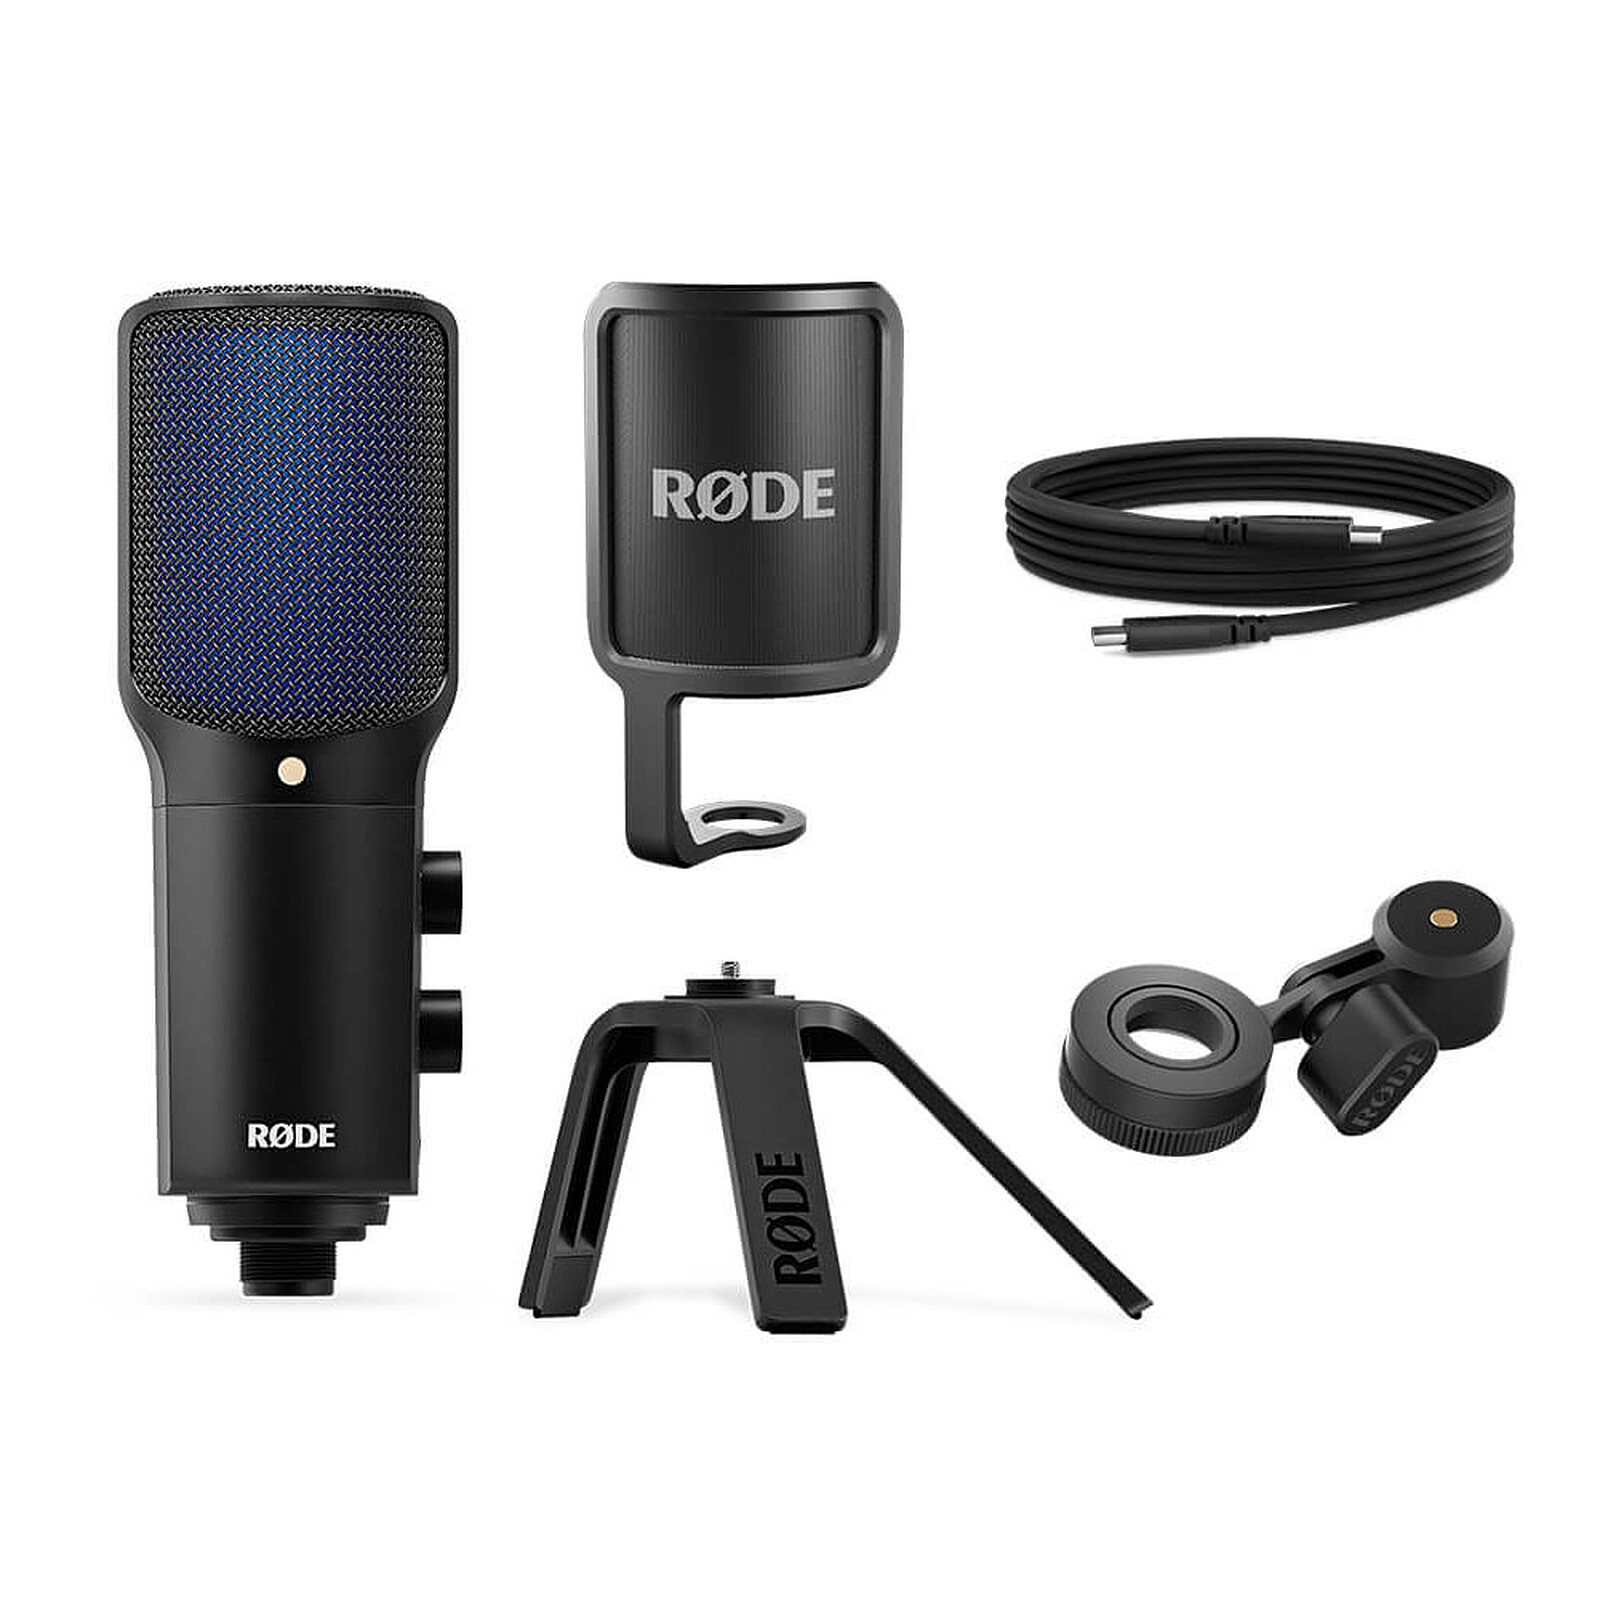 RODE NT-USB+ - Microphone - LDLC 3-year warranty